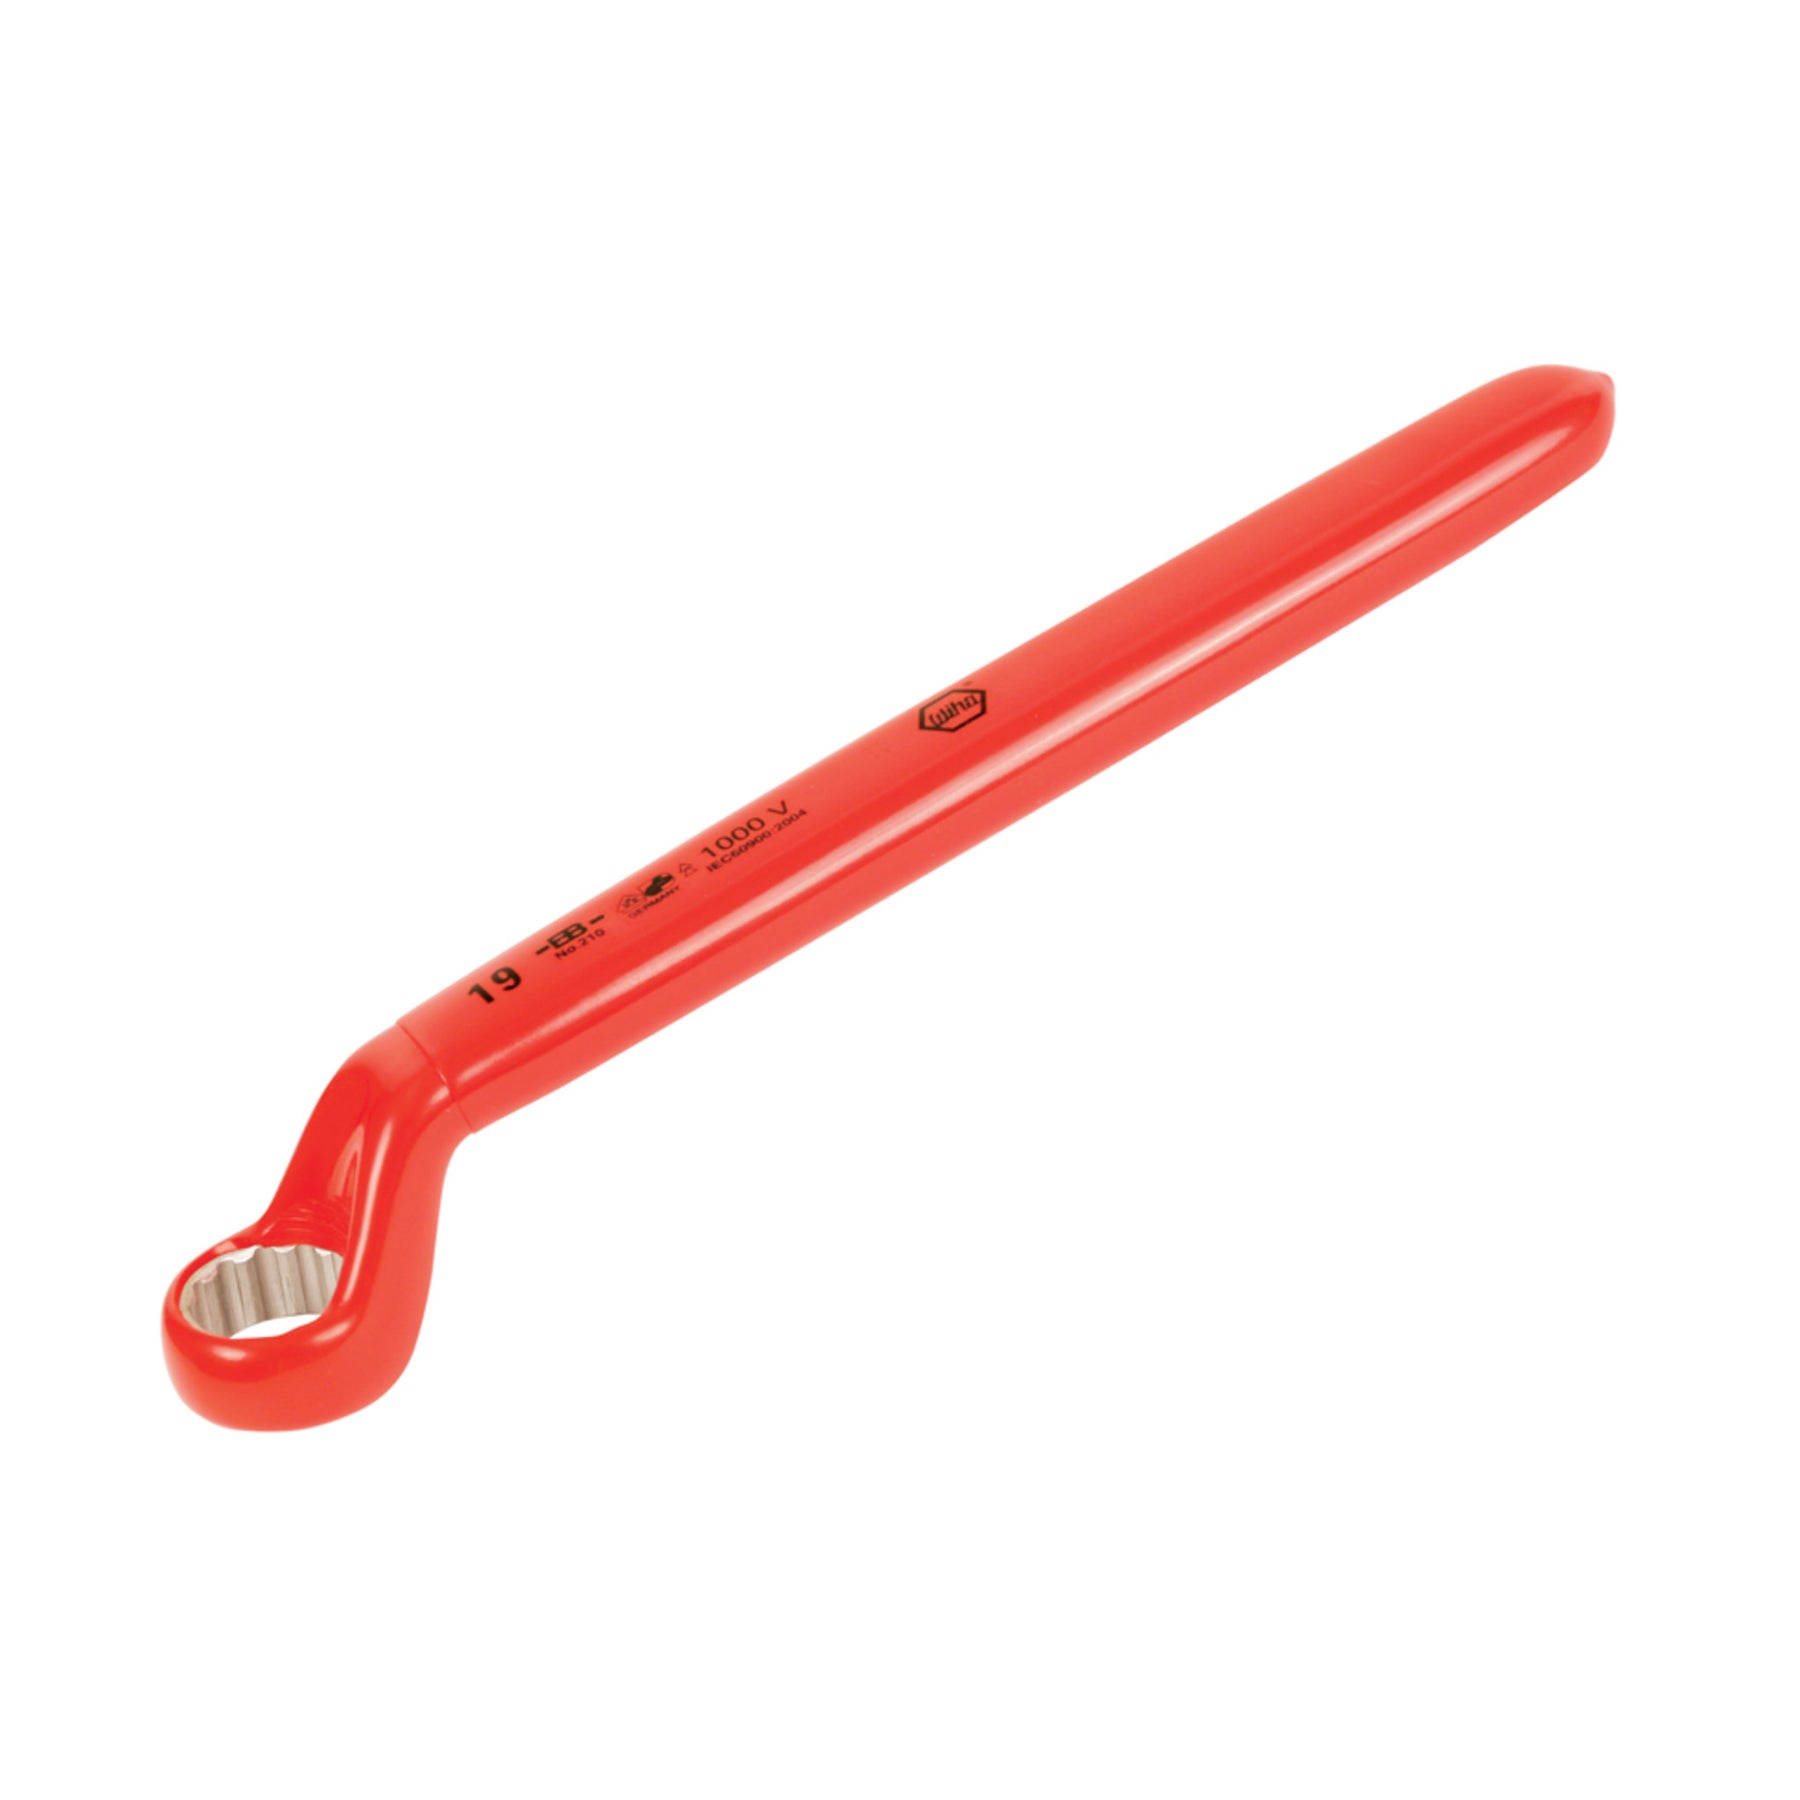 Insulated Deep Offset Wrench 1-1/4"